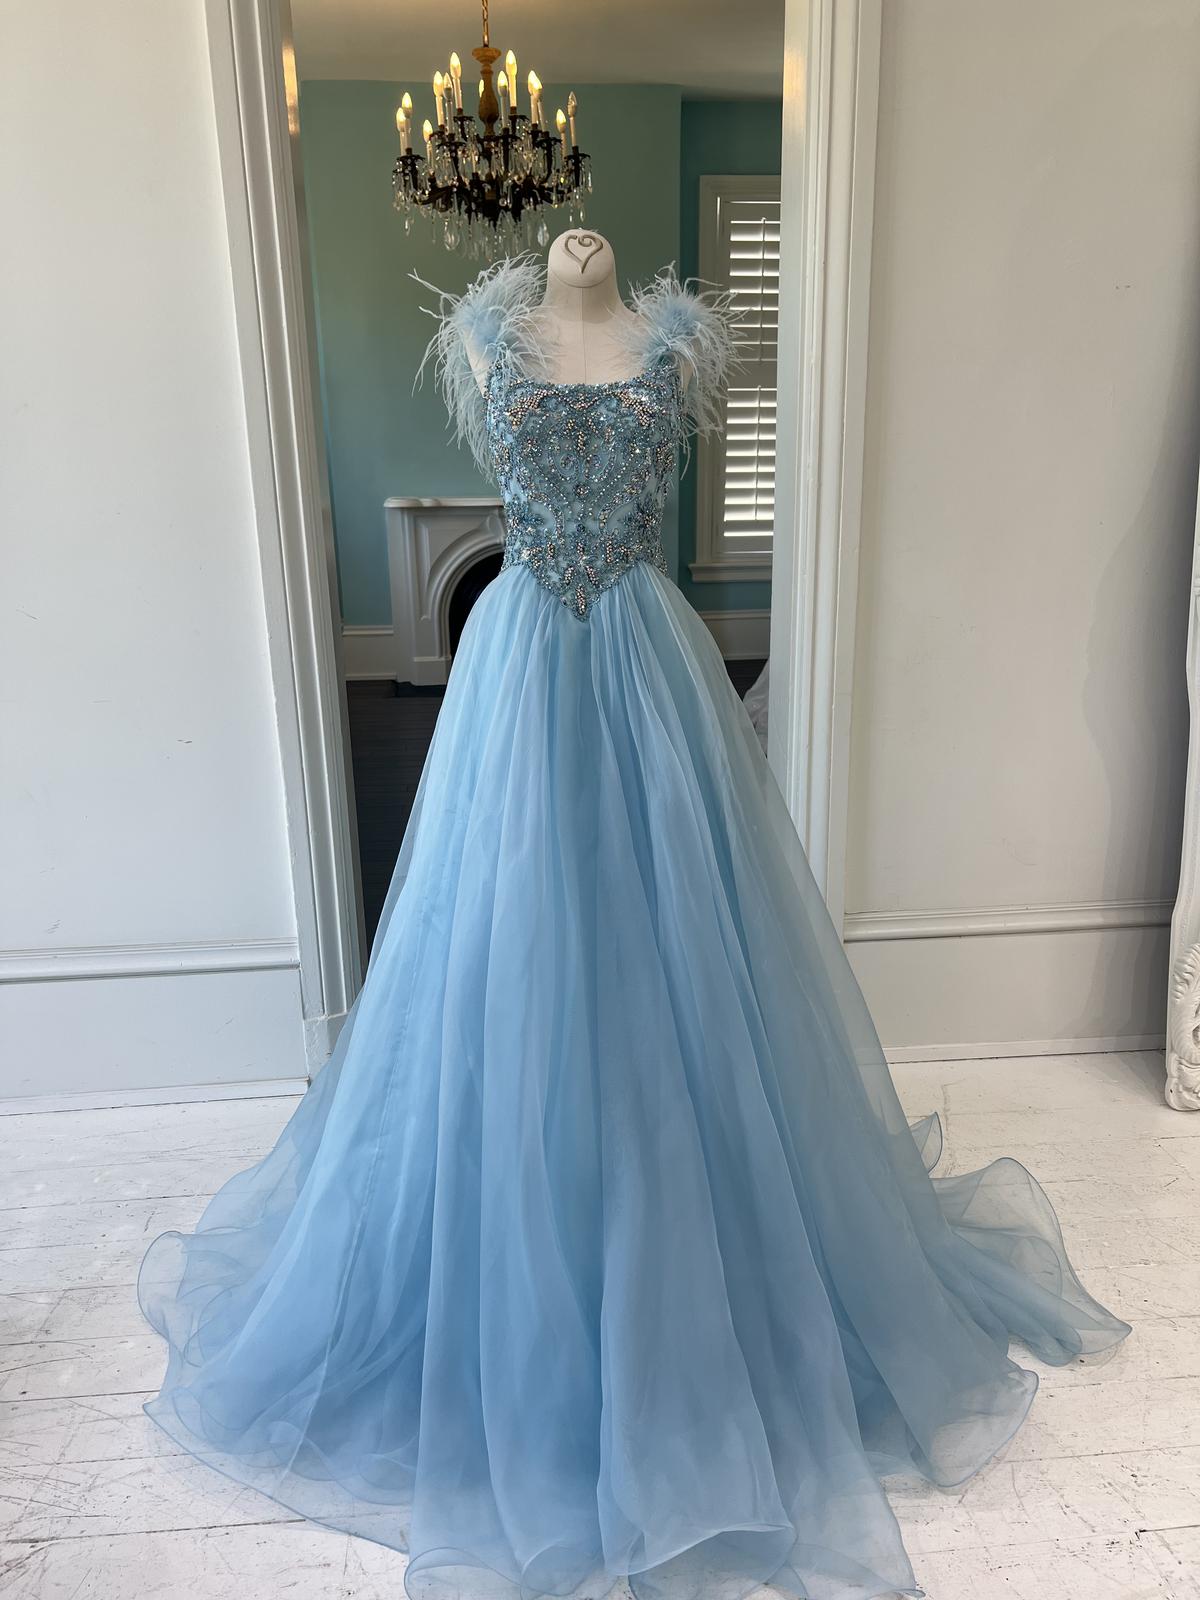 Sherri Hill Couture Light Blue Pageant Ballgown with Feathers 45162